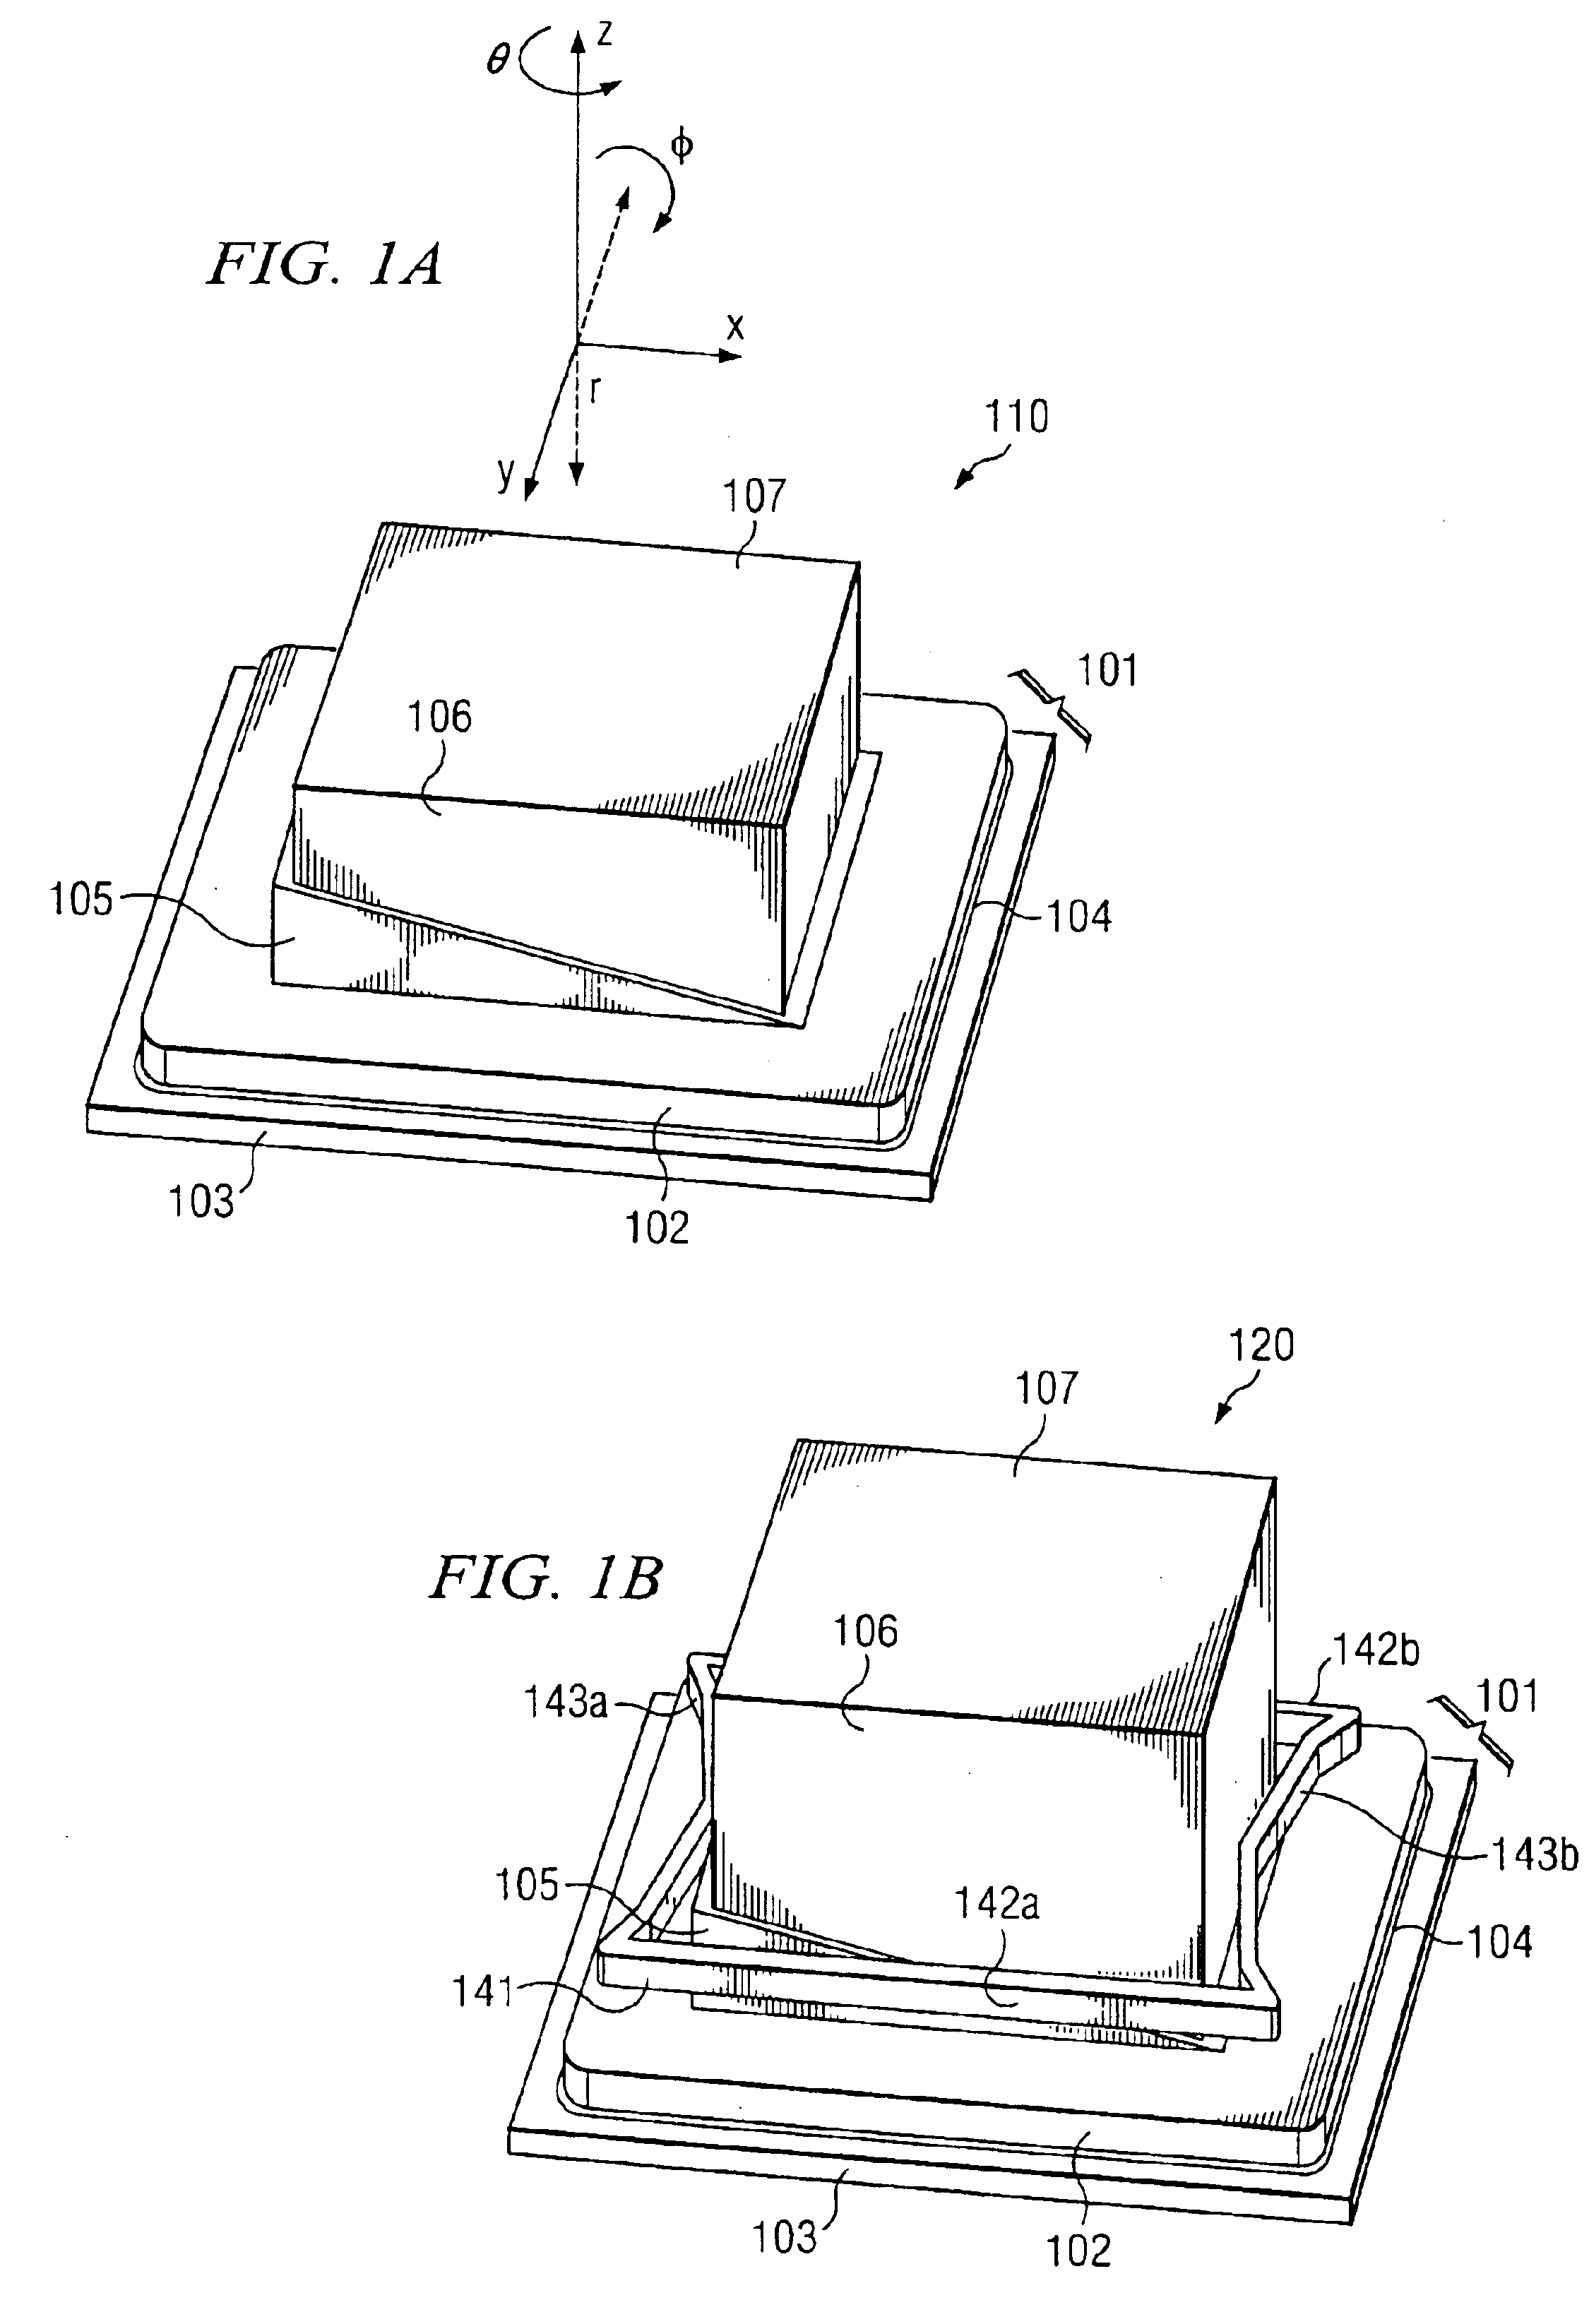 Variable height thermal interface